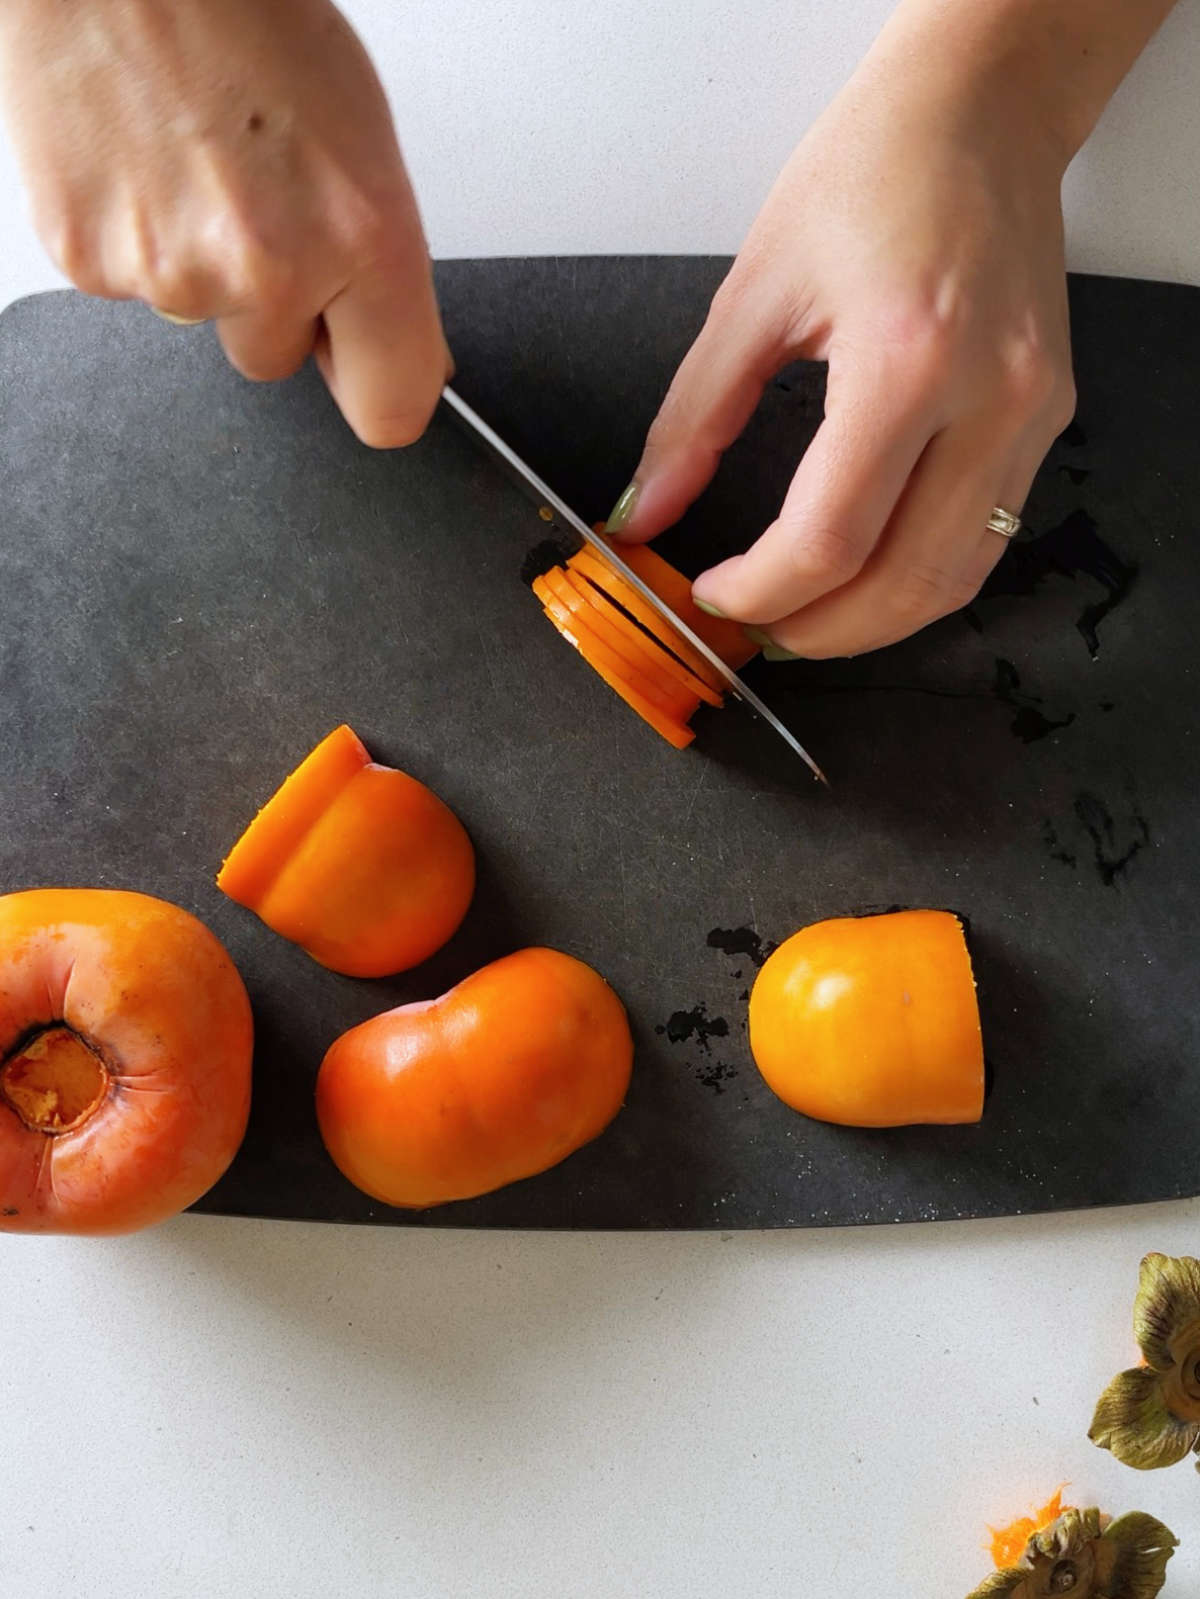 Thinly slicing a Fuyu persimmon on a black cutting board next to persimmon stems.